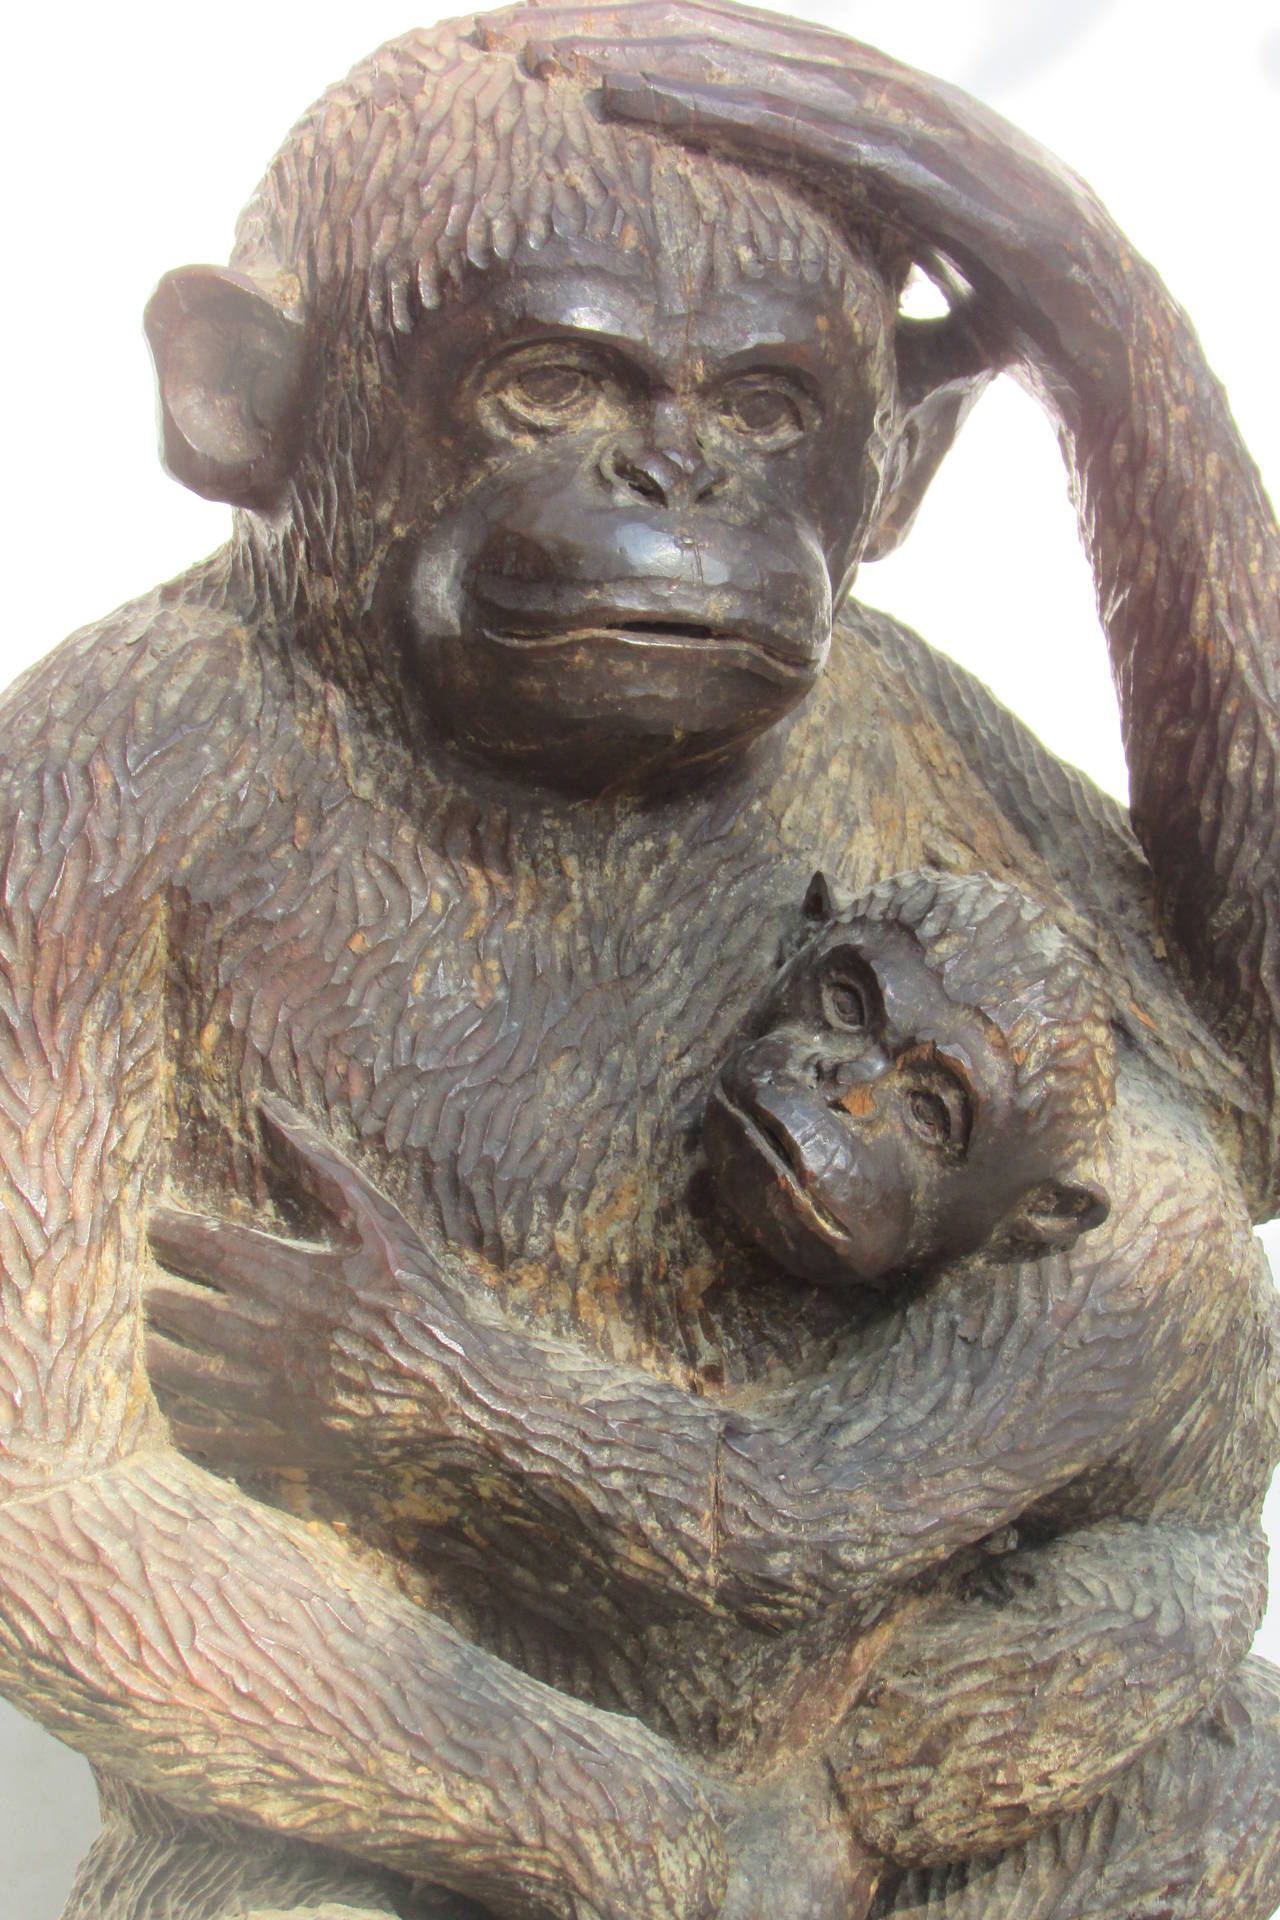 A large scale hand carved wooden adult monkey cradling a young monkey. Beautiful aged old patina and color to dense heavy wood - direct from the private collection of retired decorator working out of San Francisco during the 1960s - 1970s.